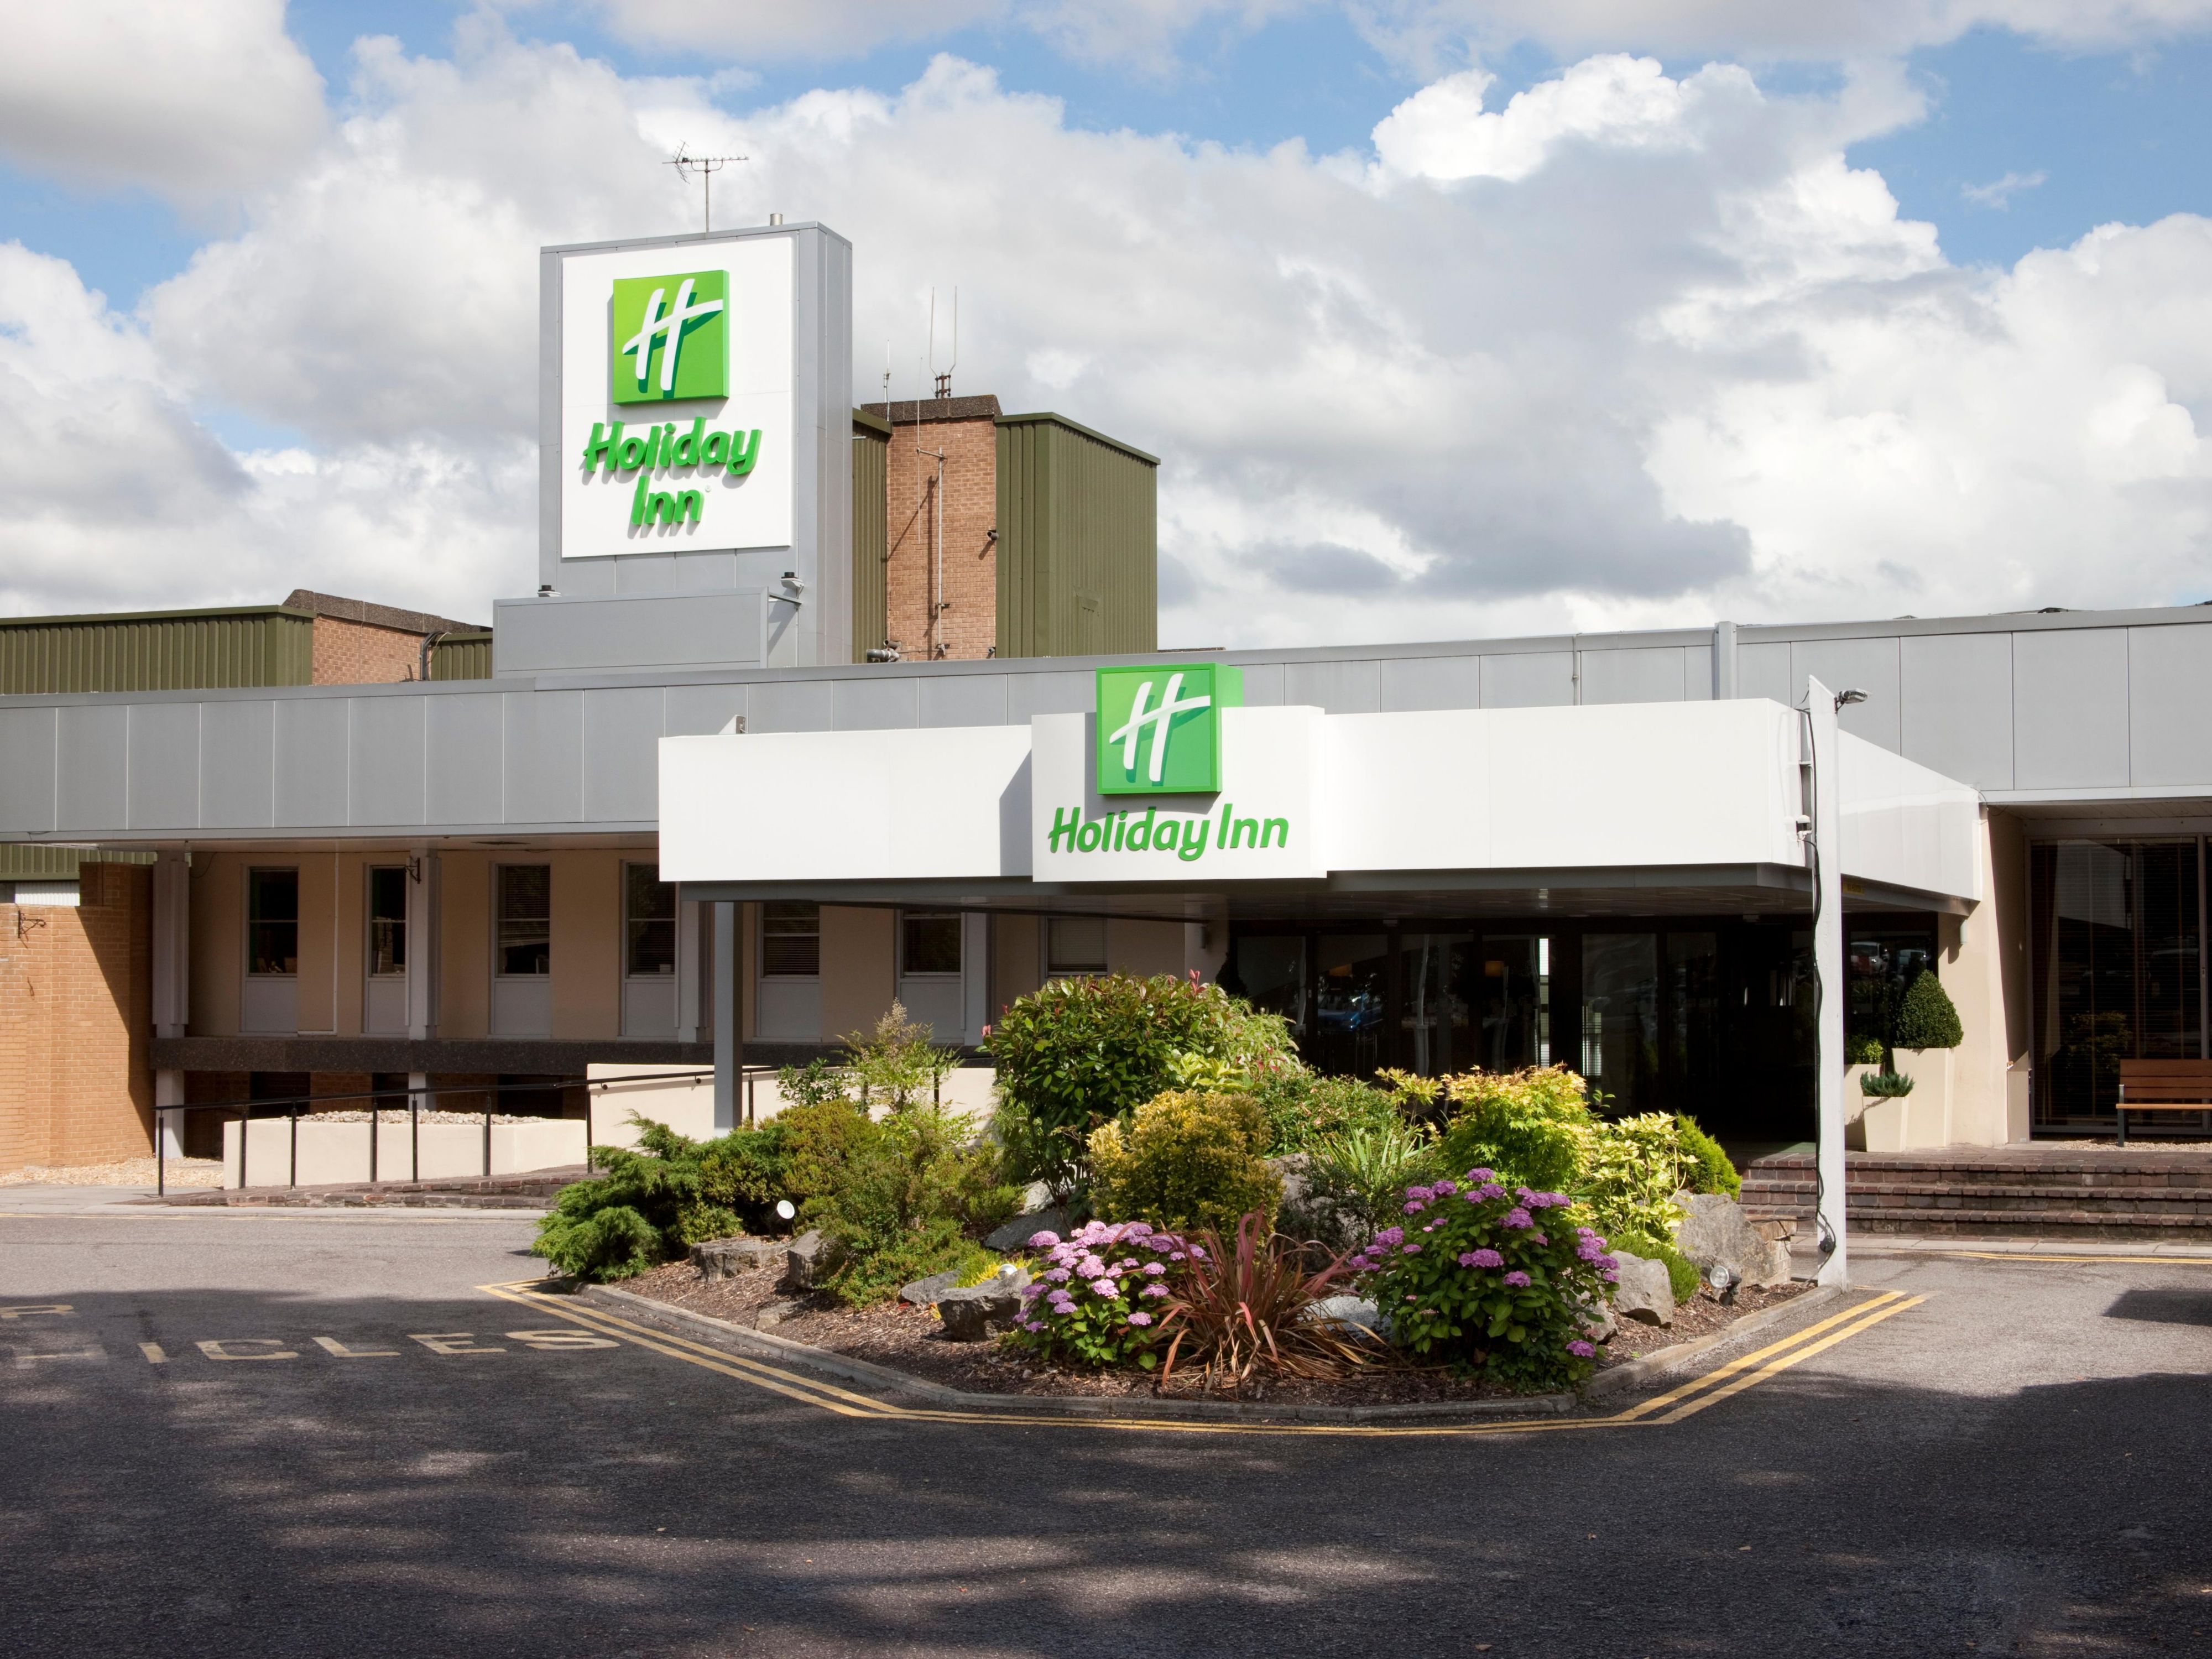 Just click on the link for a chance to visit Holiday Inn Bristol Filton virtually with a fully interactive, virtual tour. Move through the hotel exploring the bar, restaurant, meeting and event spaces, bedrooms and Spirit Health Club